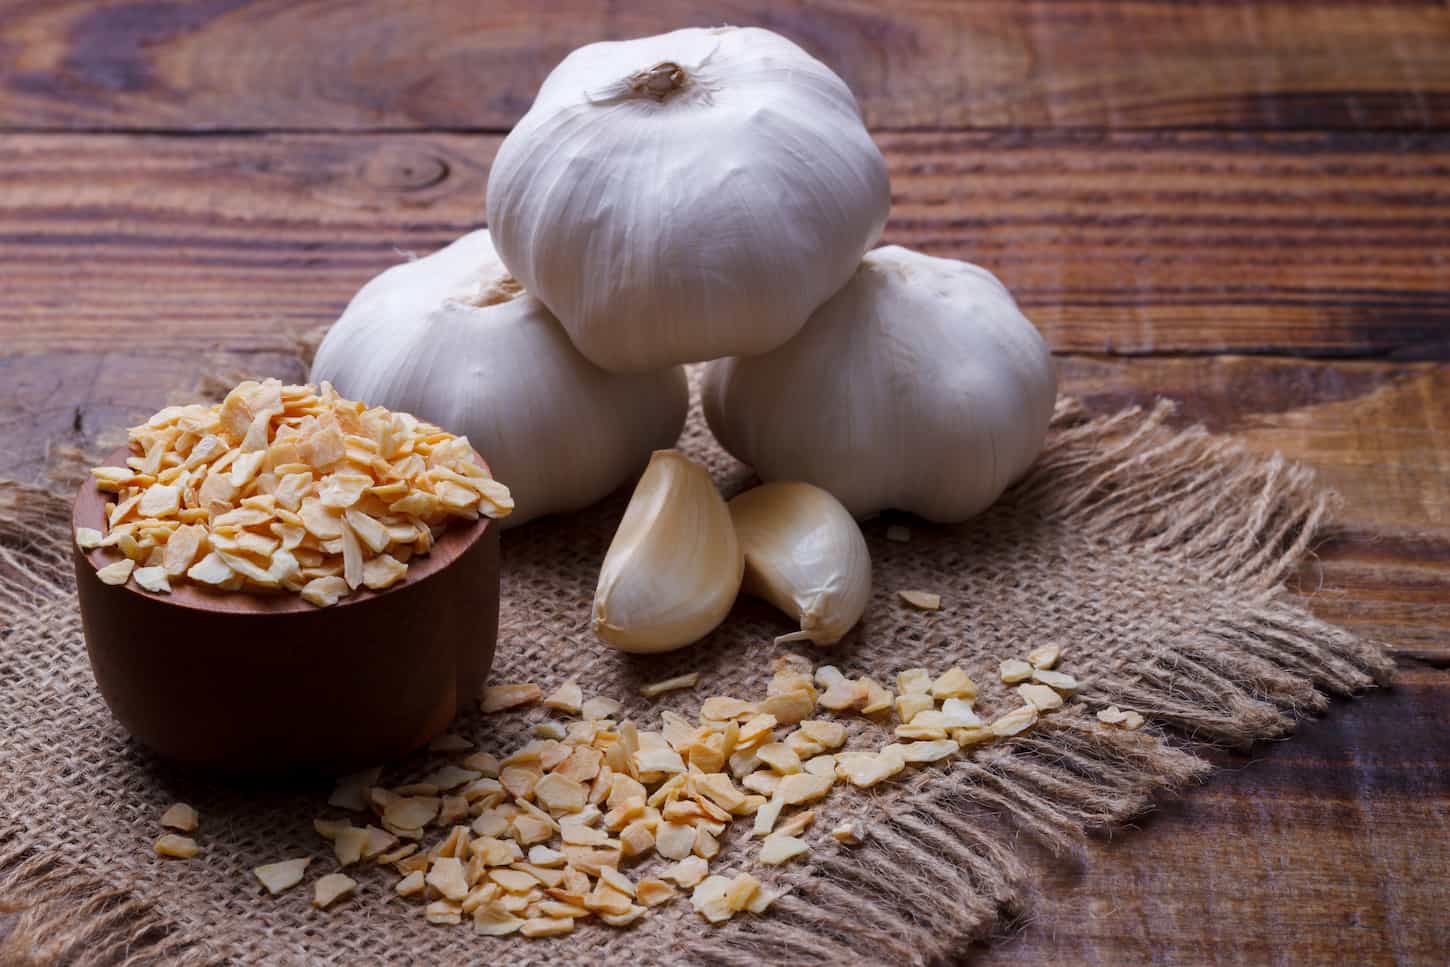 An image of a dried and fresh garlic on a wooden table.